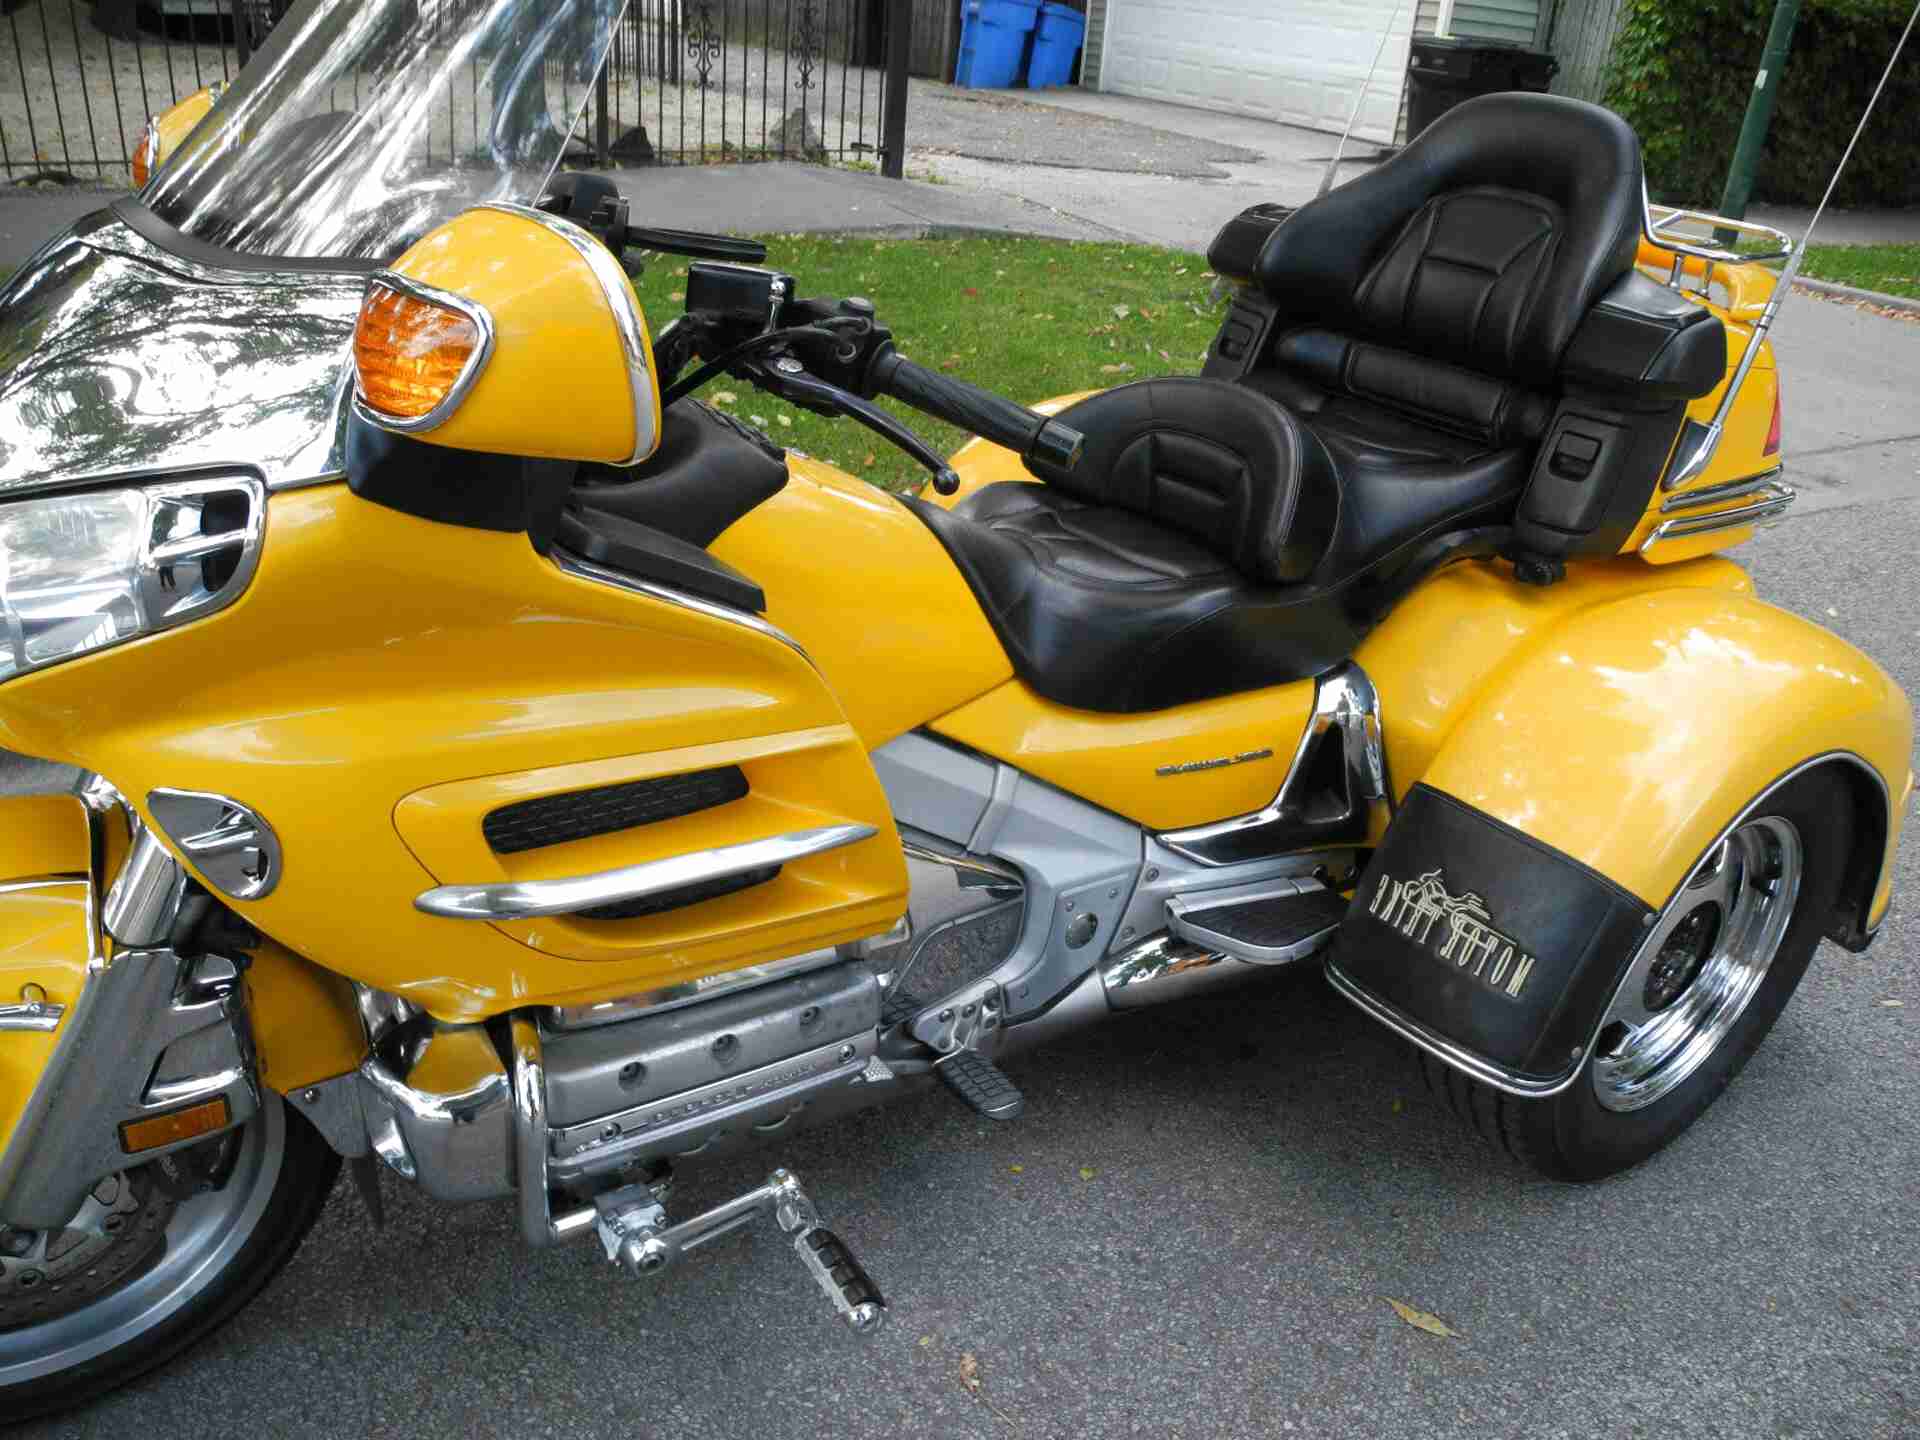 Used Honda Goldwing Trikes For Sale Near Me View All